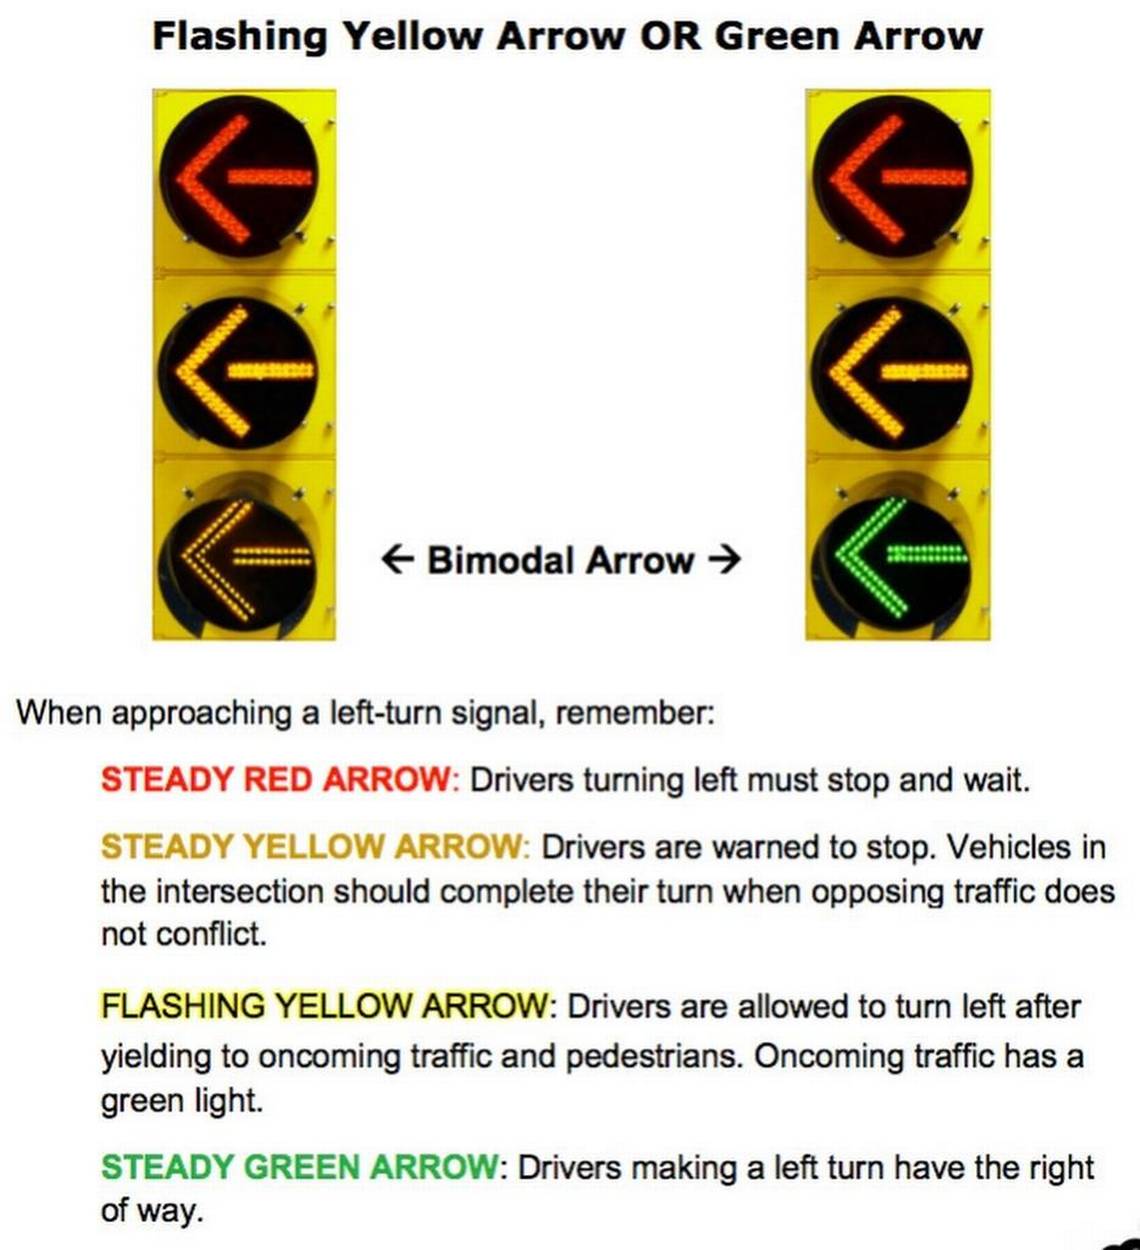 Red and Yellow Arrow Logo - Dr. Traffic: Red arrow makes right-turns confusing | Charlotte Observer